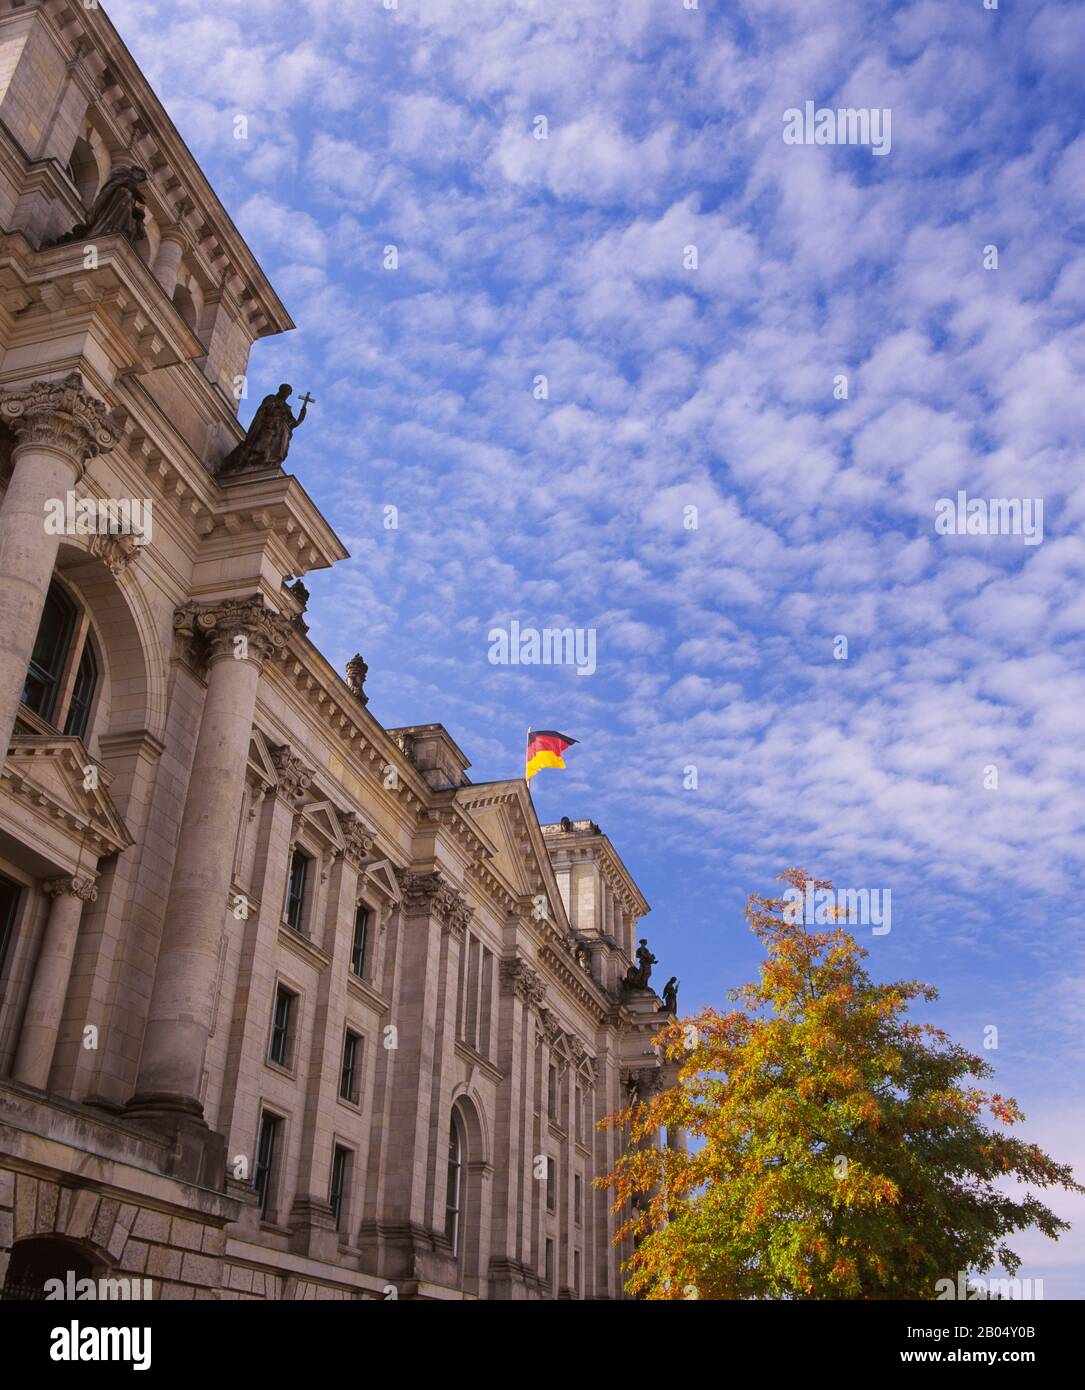 German flag on the top of a building, The Reichstag, Berlin, Germany Stock Photo